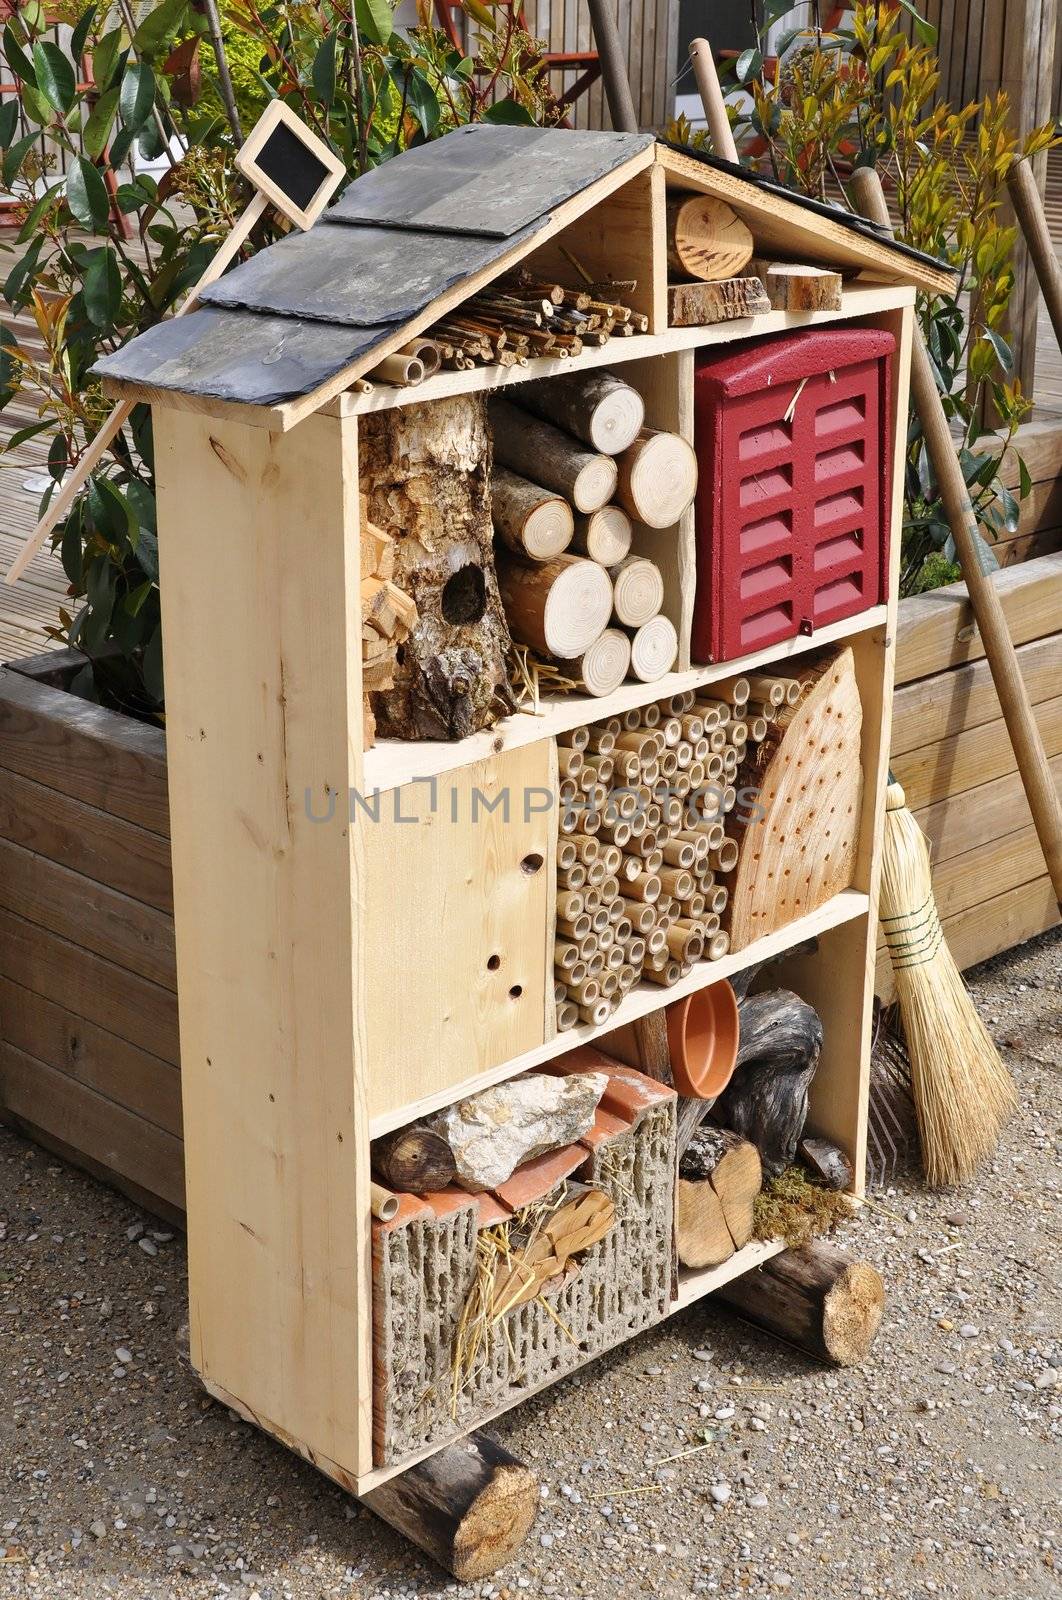 Insect house by dutourdumonde